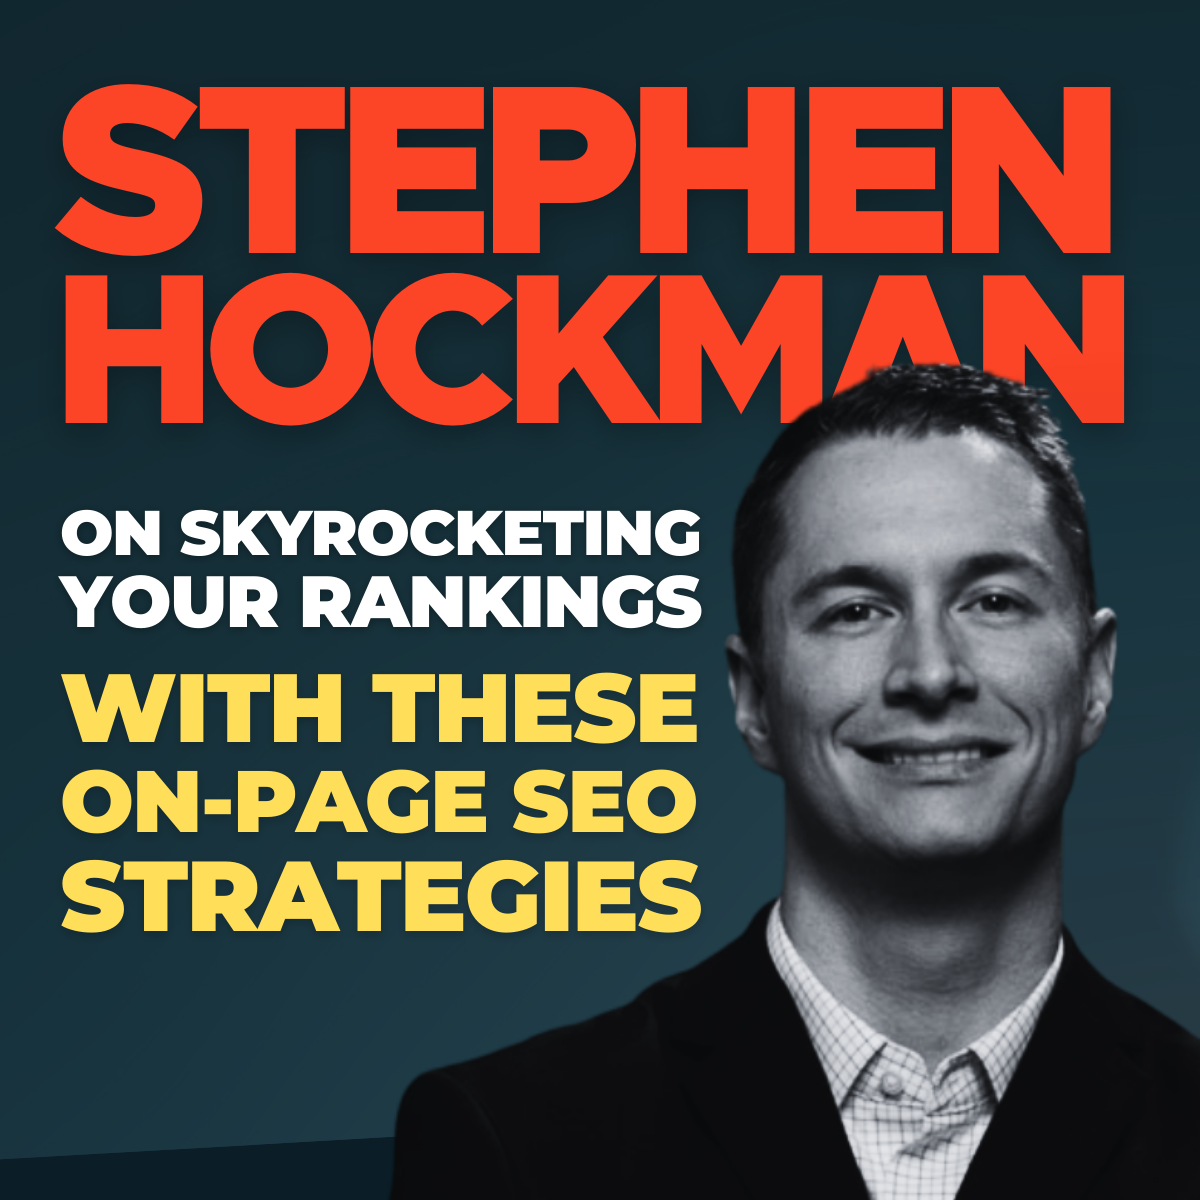 Stephen Hockman on skyrocketing your rankings with these on-page SEO strategies